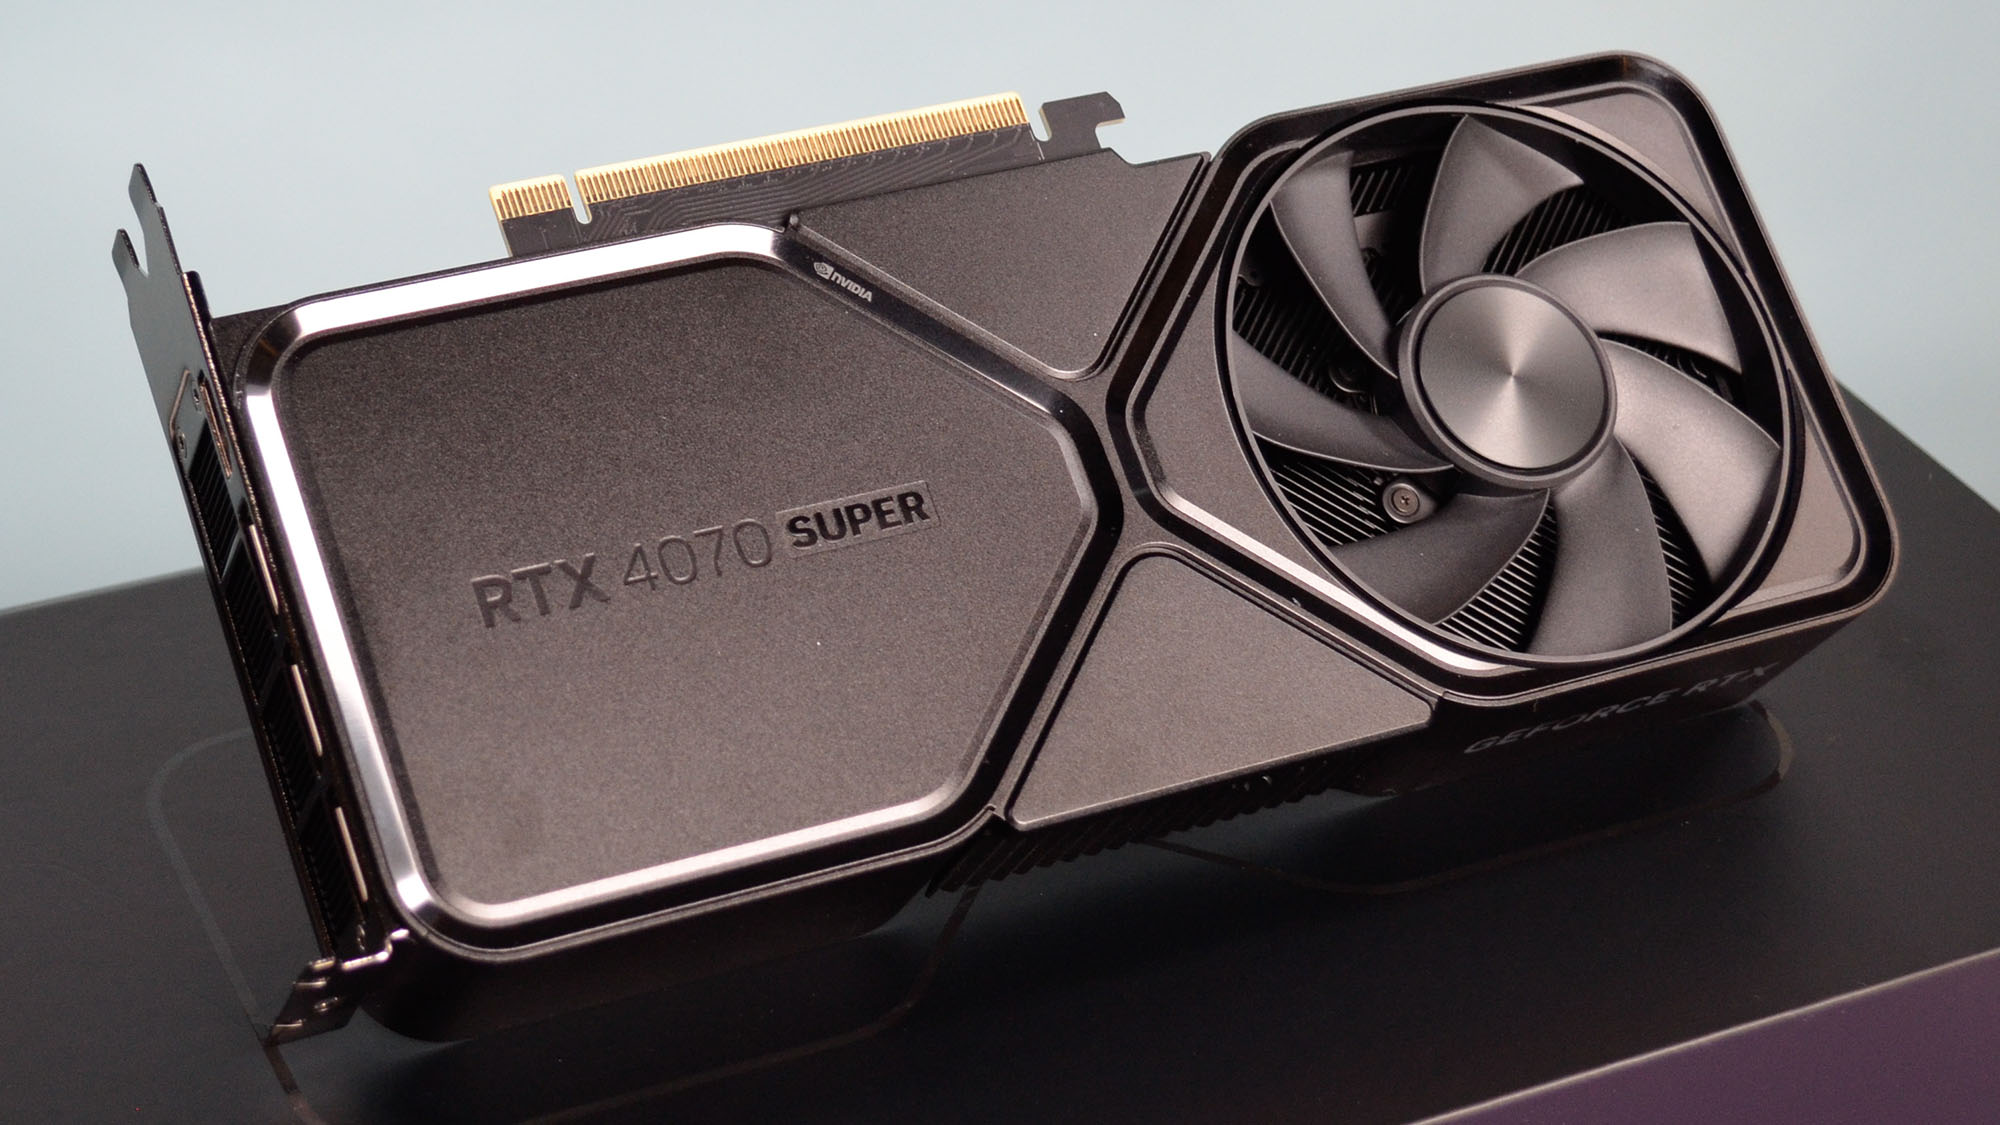 AMD Radeon RX 7800 XT Desktop graphics card review: More affordable GeForce  RTX 4070 performance -  Reviews